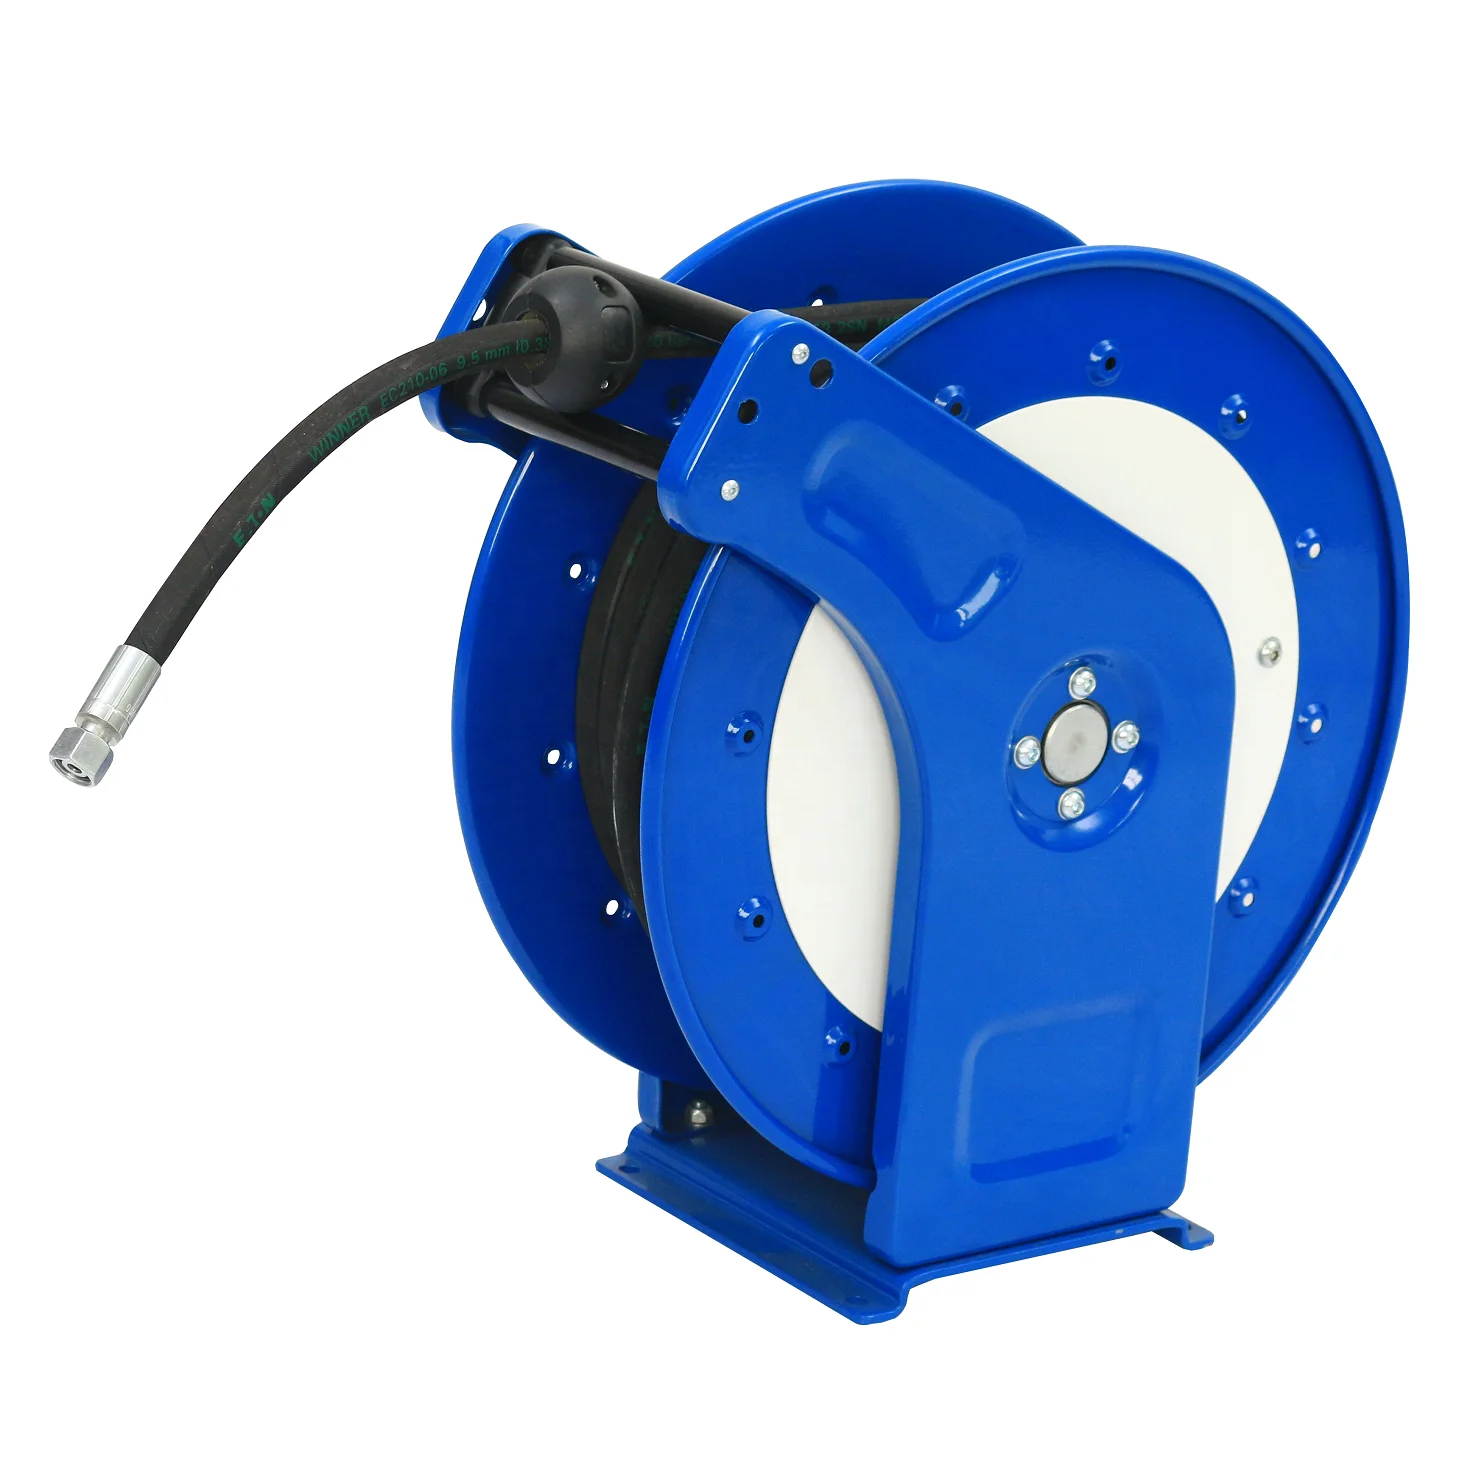 https://ae01.alicdn.com/kf/S4c254c05563844a497c3c5a91bc405a9S/Spring-Driven-Self-retracting-Industrial-High-Pressure-Cleaning-Hose-Reel-for-Car-Street-Washing-and-Fire.jpg